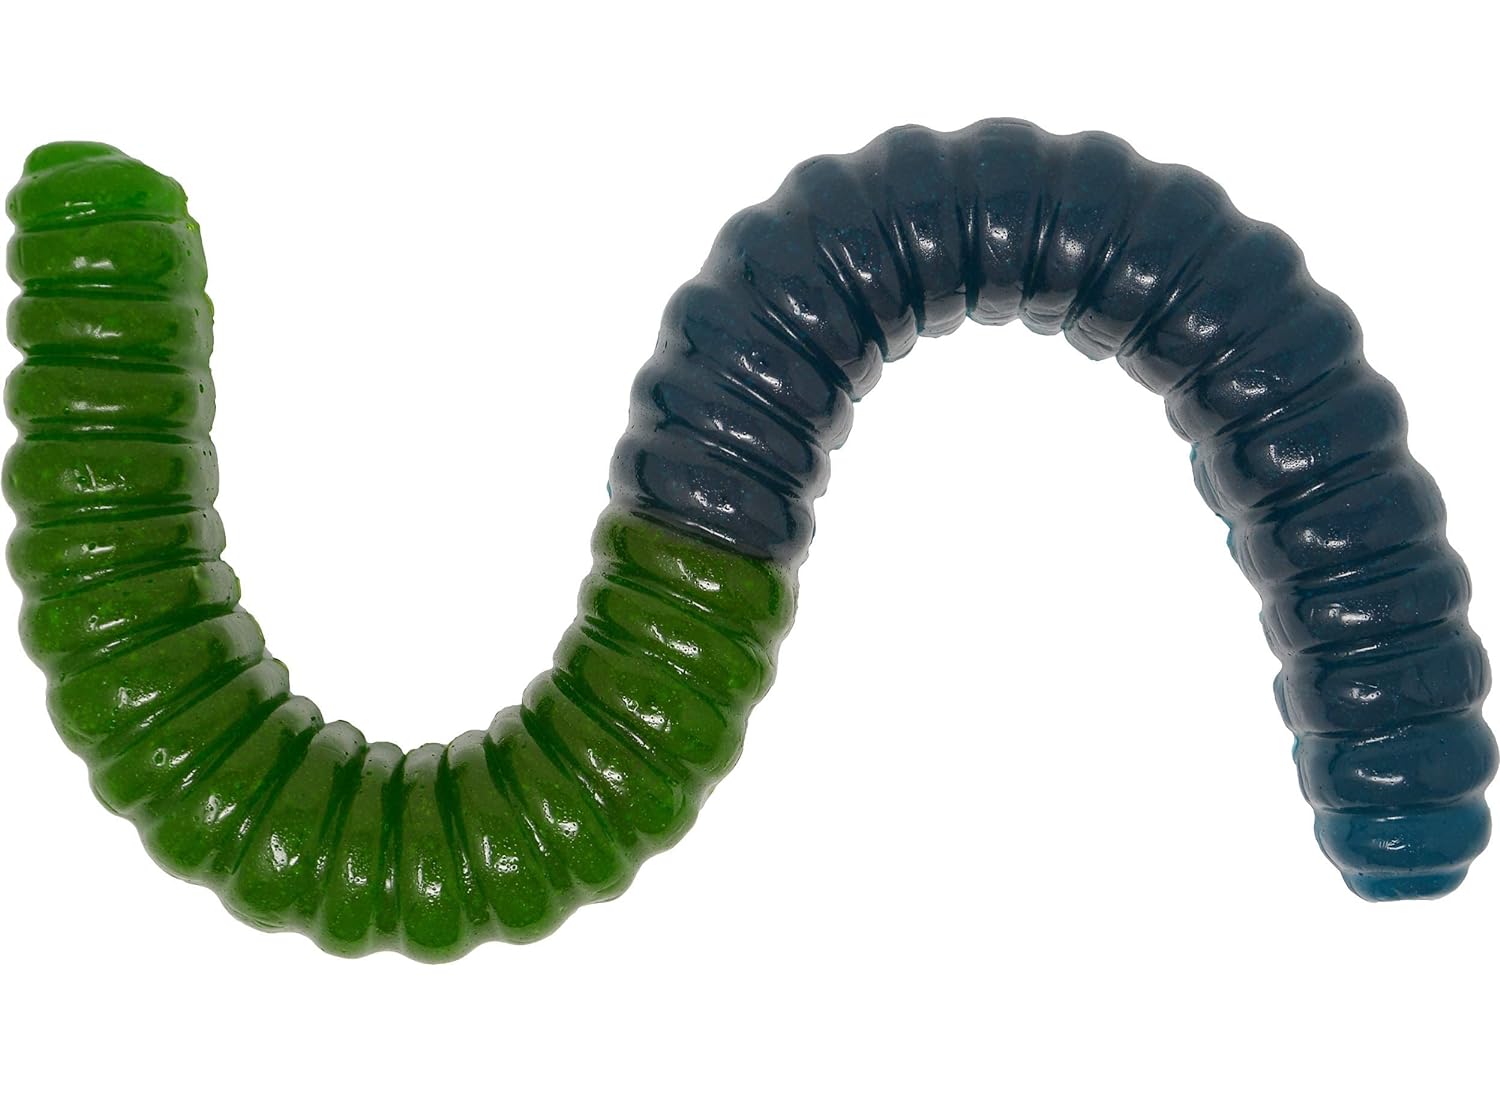 By The Cup Giant Gummy Worm, Blue Raspberry and Green Apple Flavored, 2.5 lbs